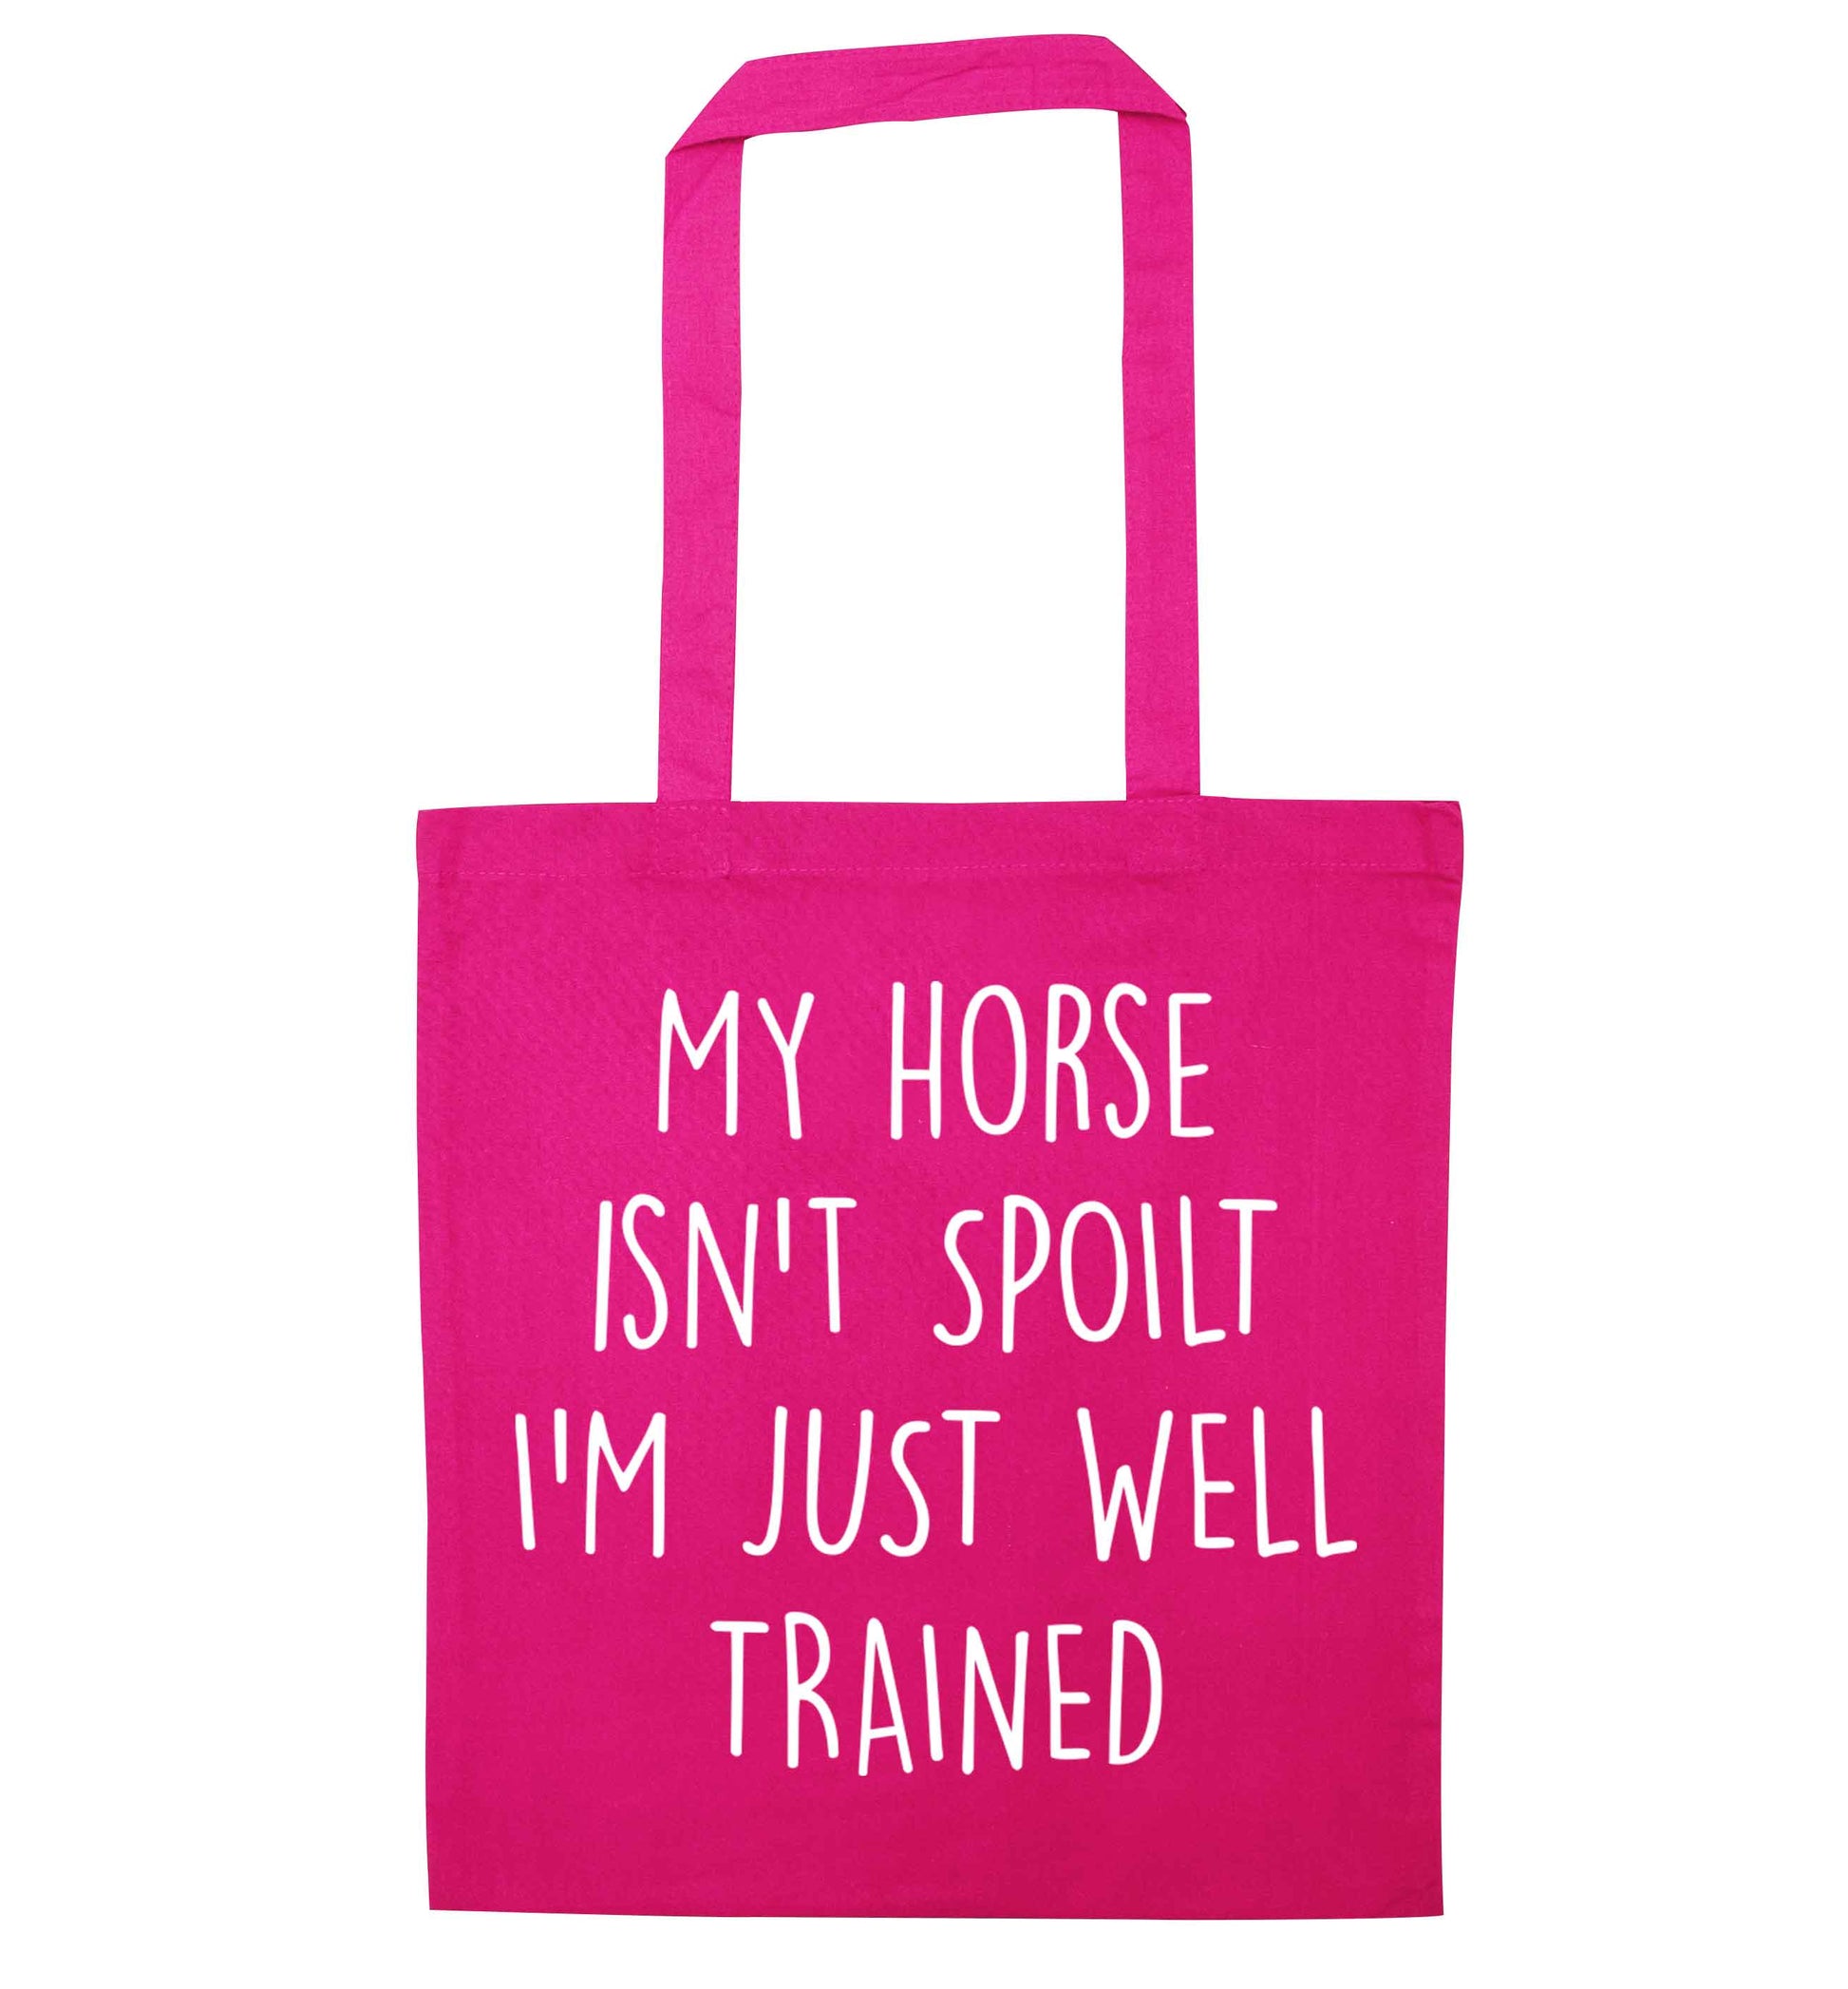 My horse isn't spoilt I'm just well trained pink tote bag